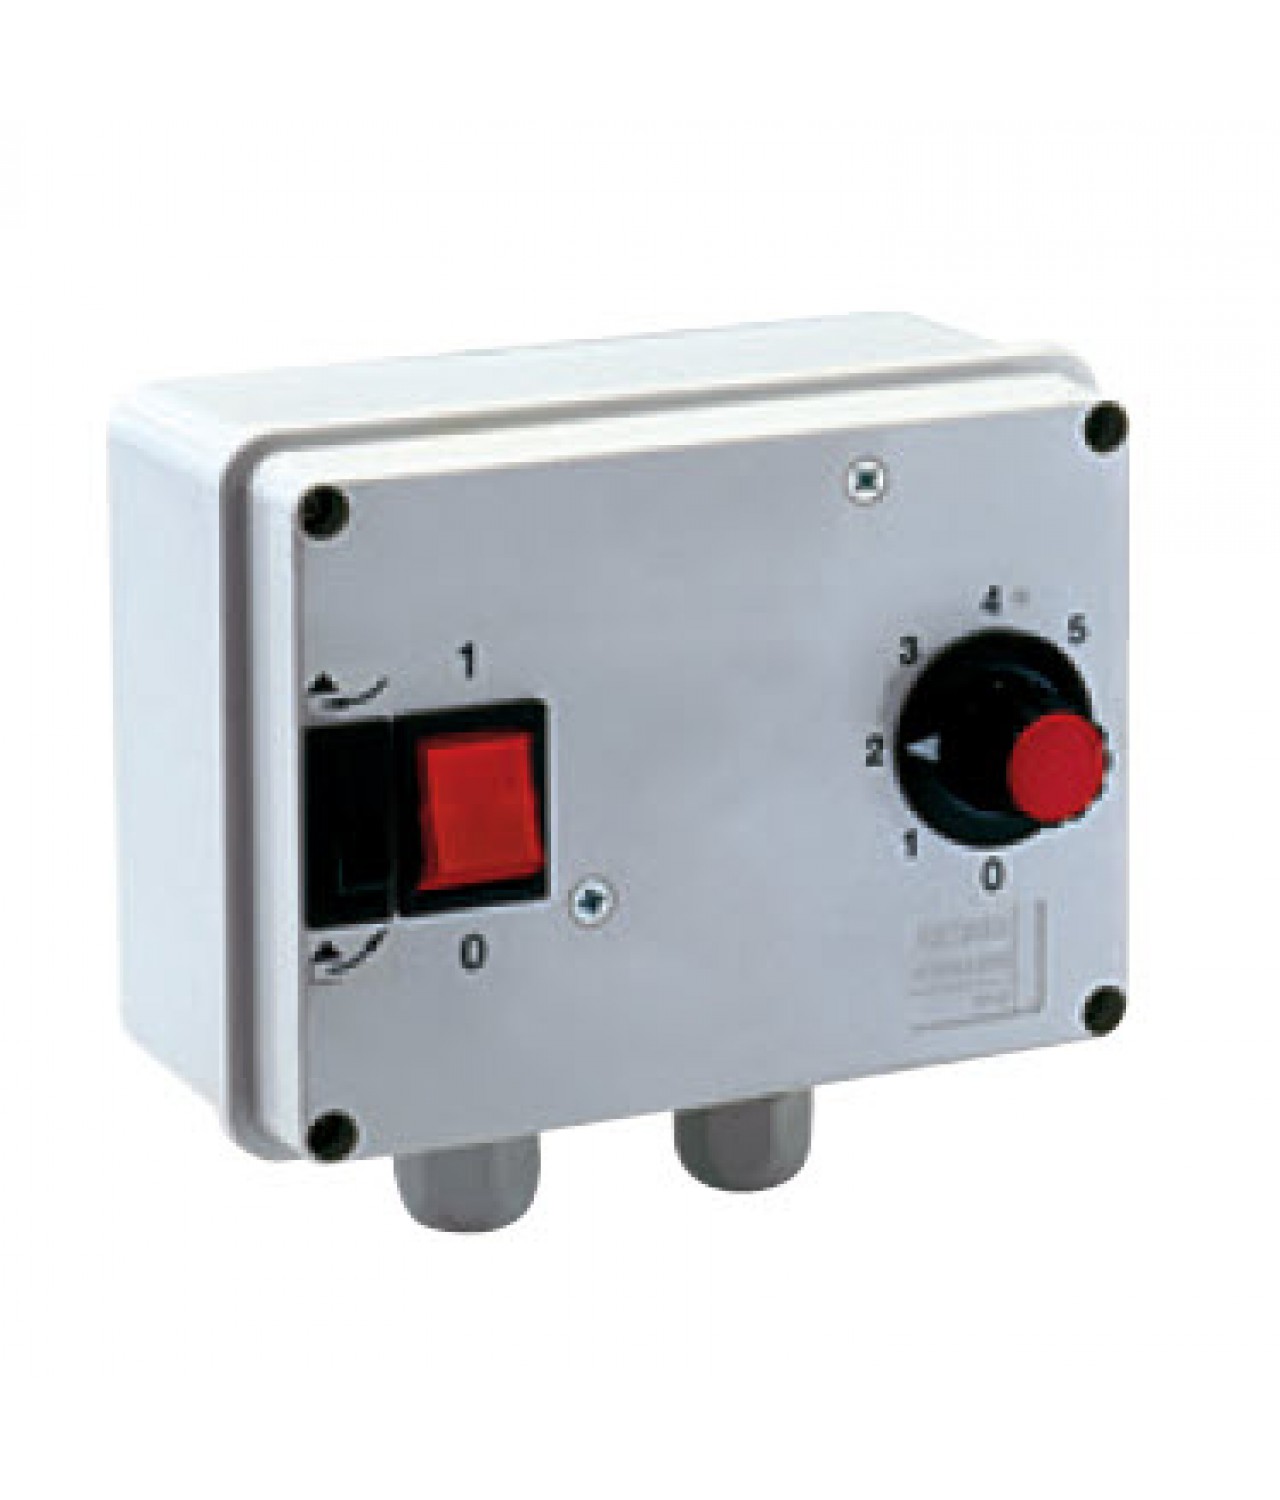 Transformer 6 step fan speed controller RVS/R PLUS for reverible models, ordered separately